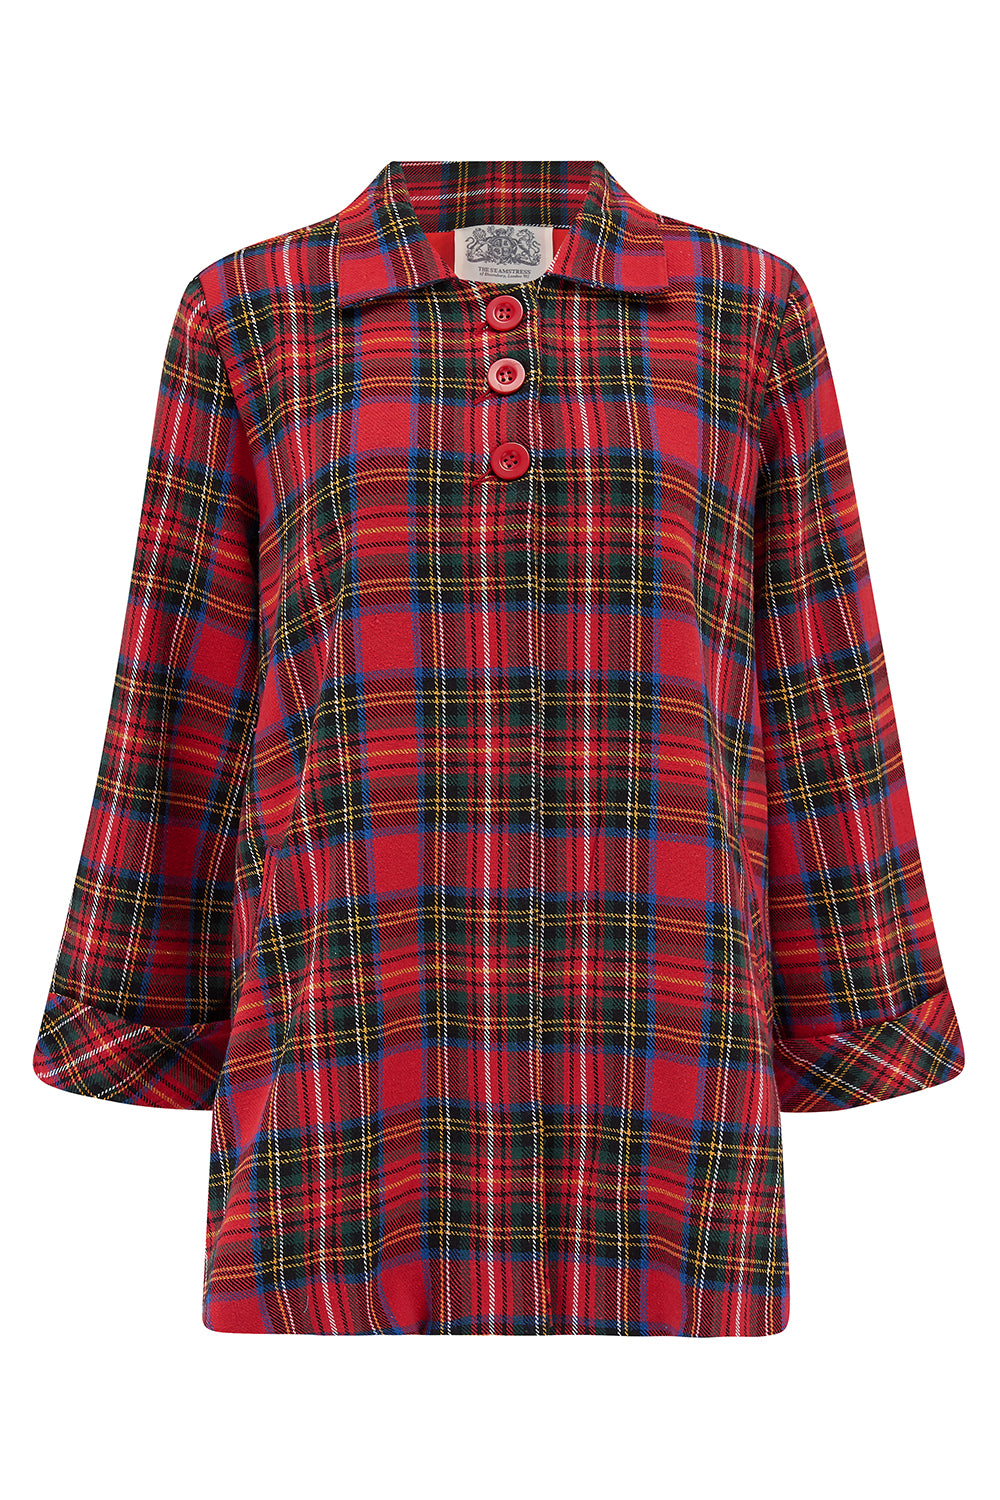 Swing Jacket in Red Tartan Check , Vintage 1940s Cape Style Inspired Over Coat - True and authentic vintage style clothing, inspired by the Classic styles of CC41 , WW2 and the fun 1950s RocknRoll era, for everyday wear plus events like Goodwood Revival, Twinwood Festival and Viva Las Vegas Rockabilly Weekend Rock n Romance The Seamstress Of Bloomsbury